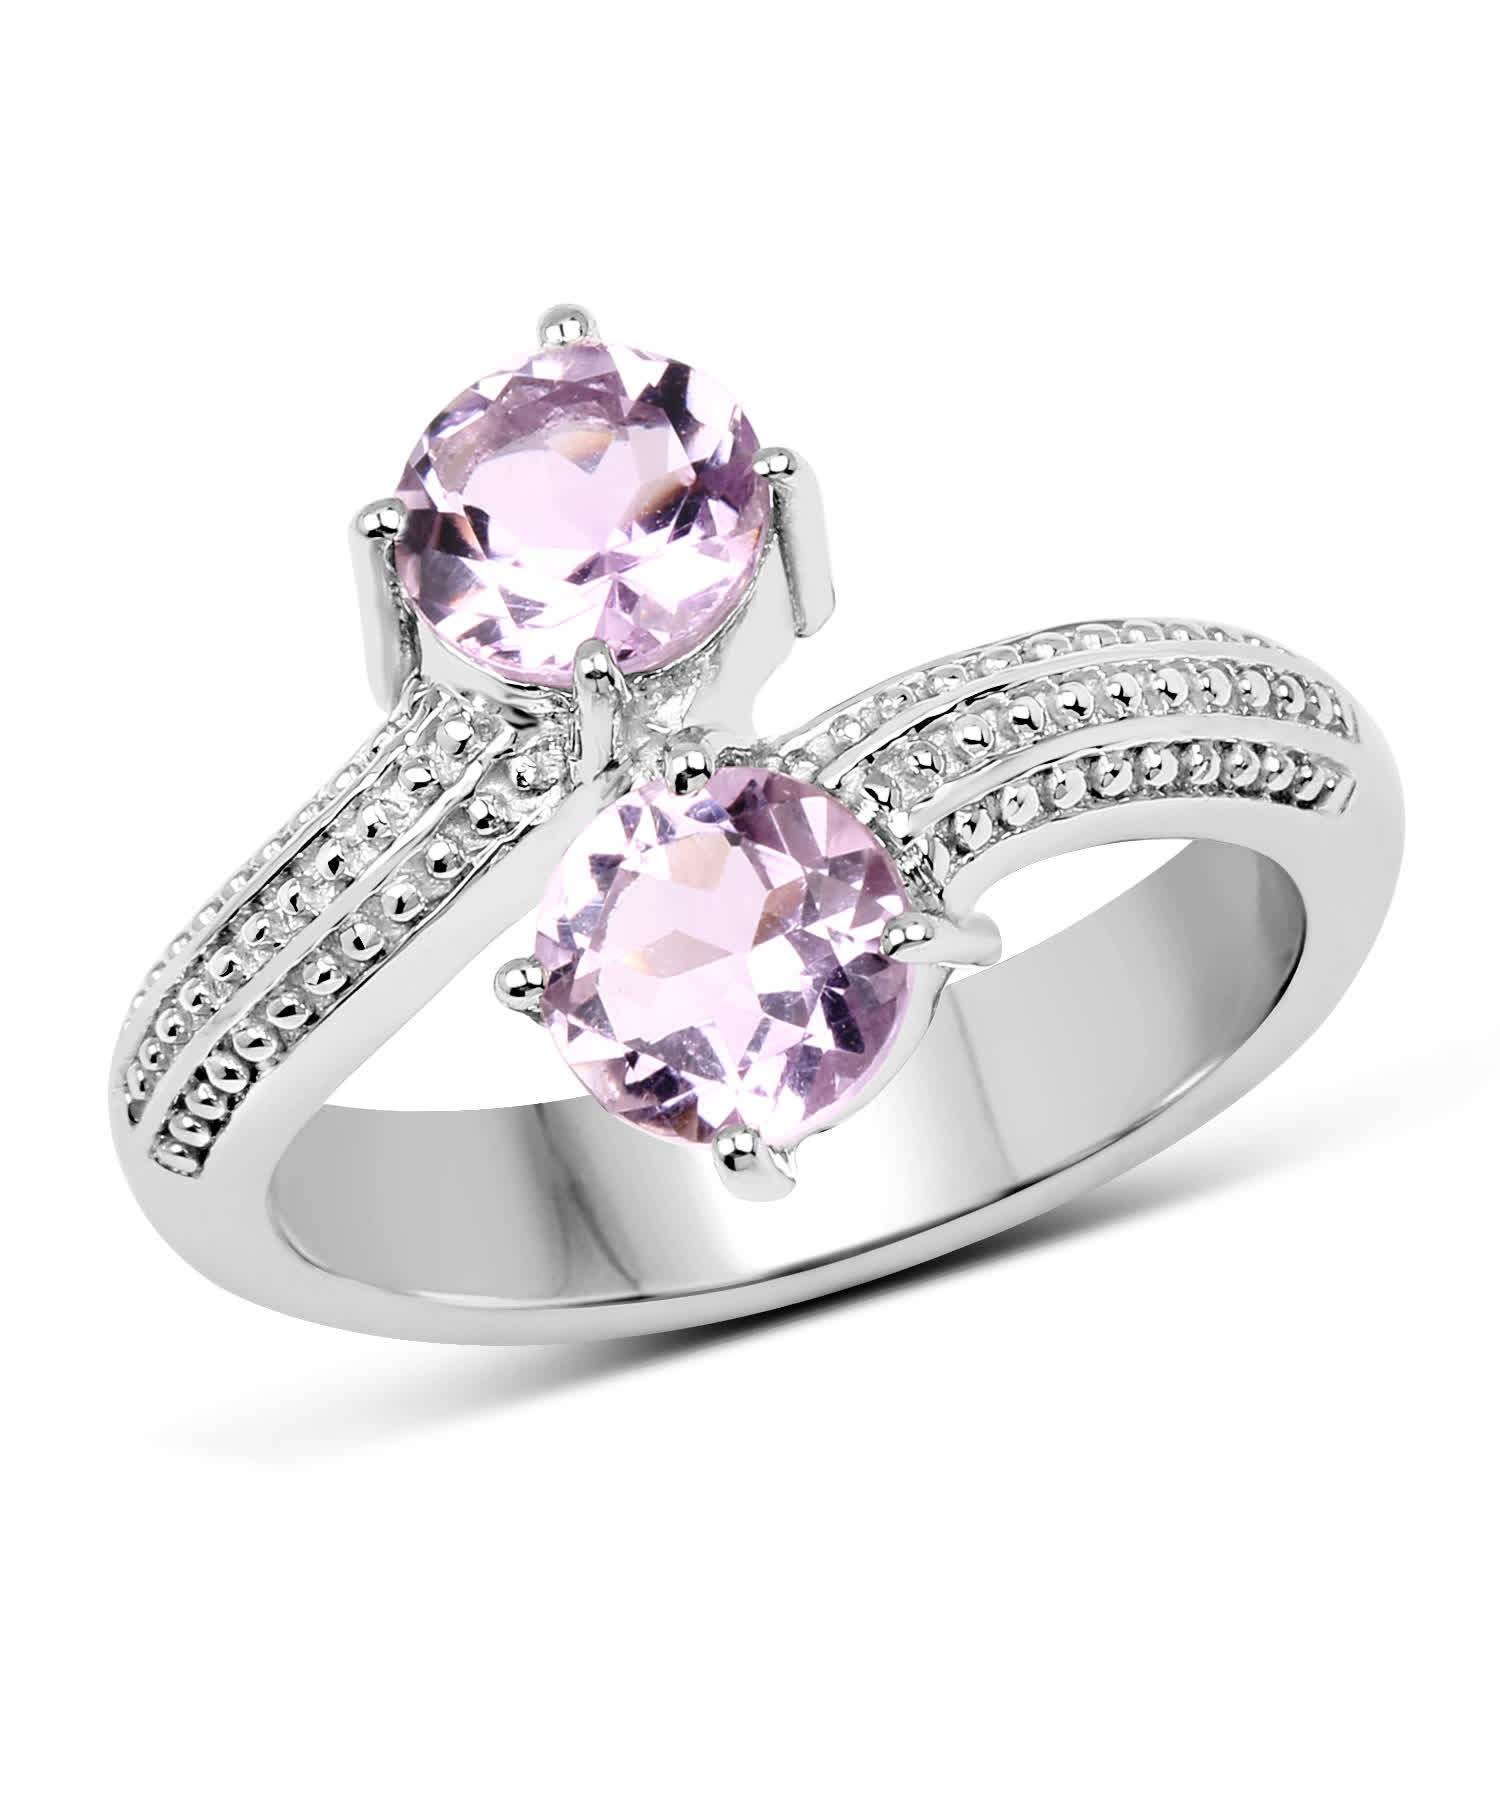 1.46ctw Natural Amethyst Rhodium Plated 925 Sterling Silver Two-Stone Ring View 1